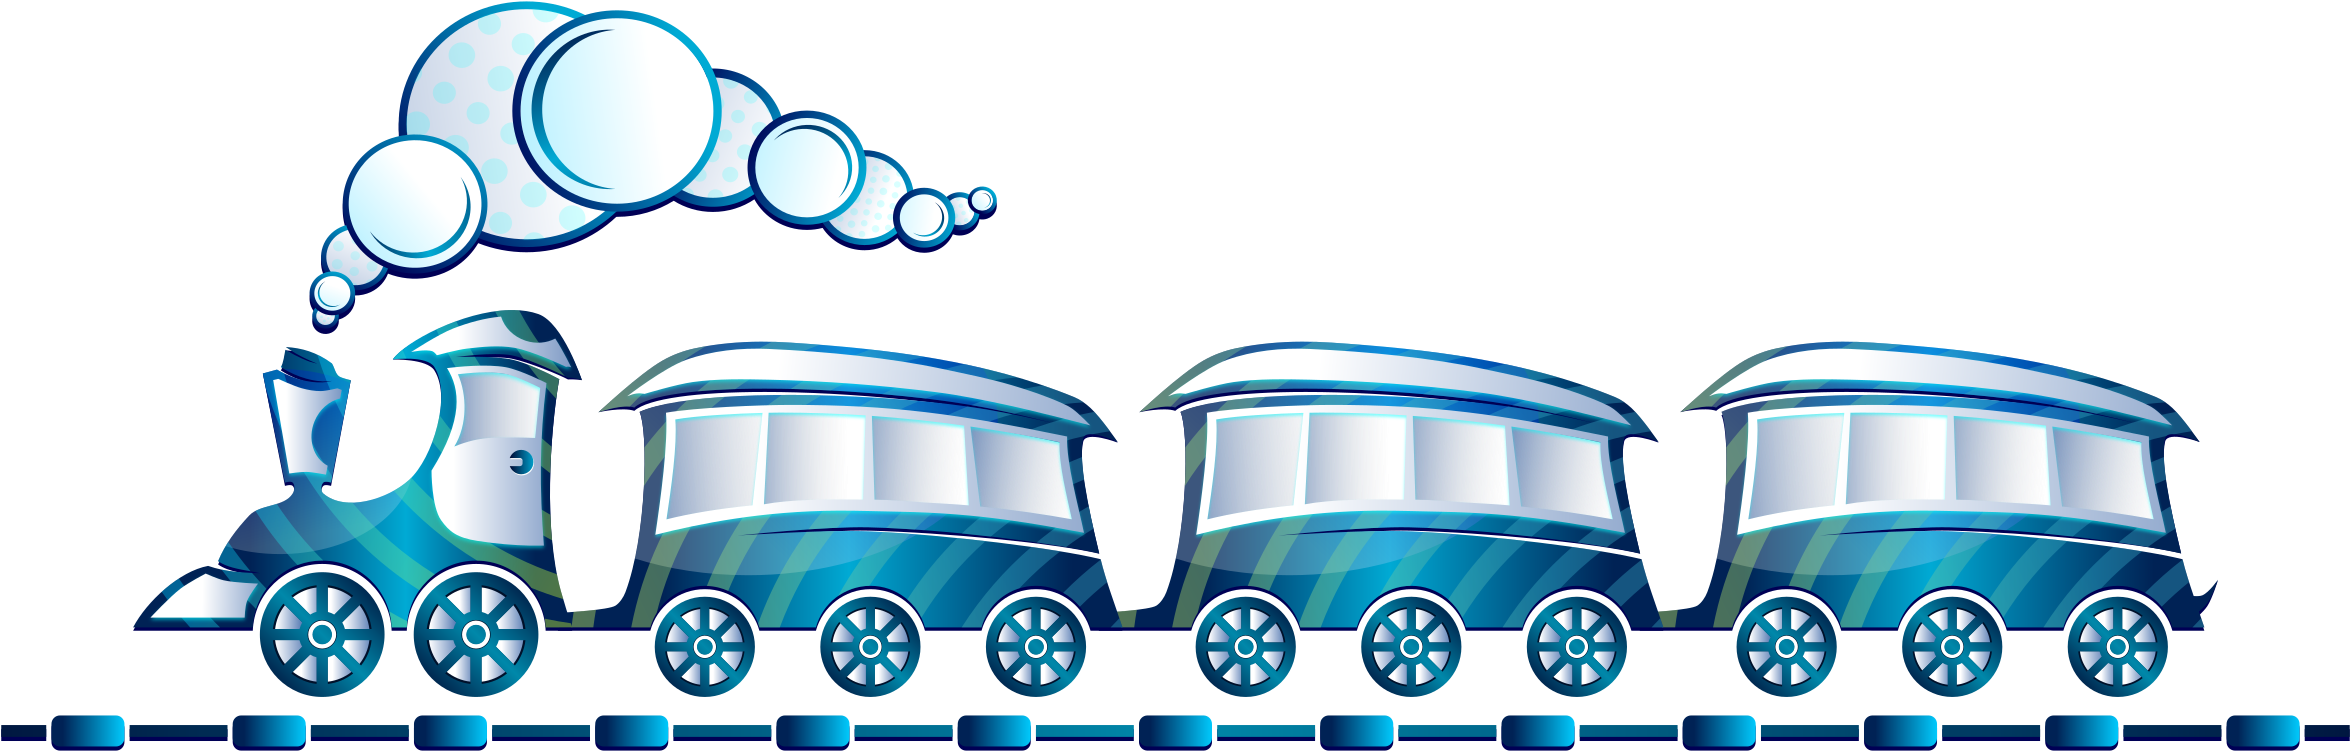 Download Subway Clipart Blue Train - Long Blue Train Cartoon PNG Image with  No Background 